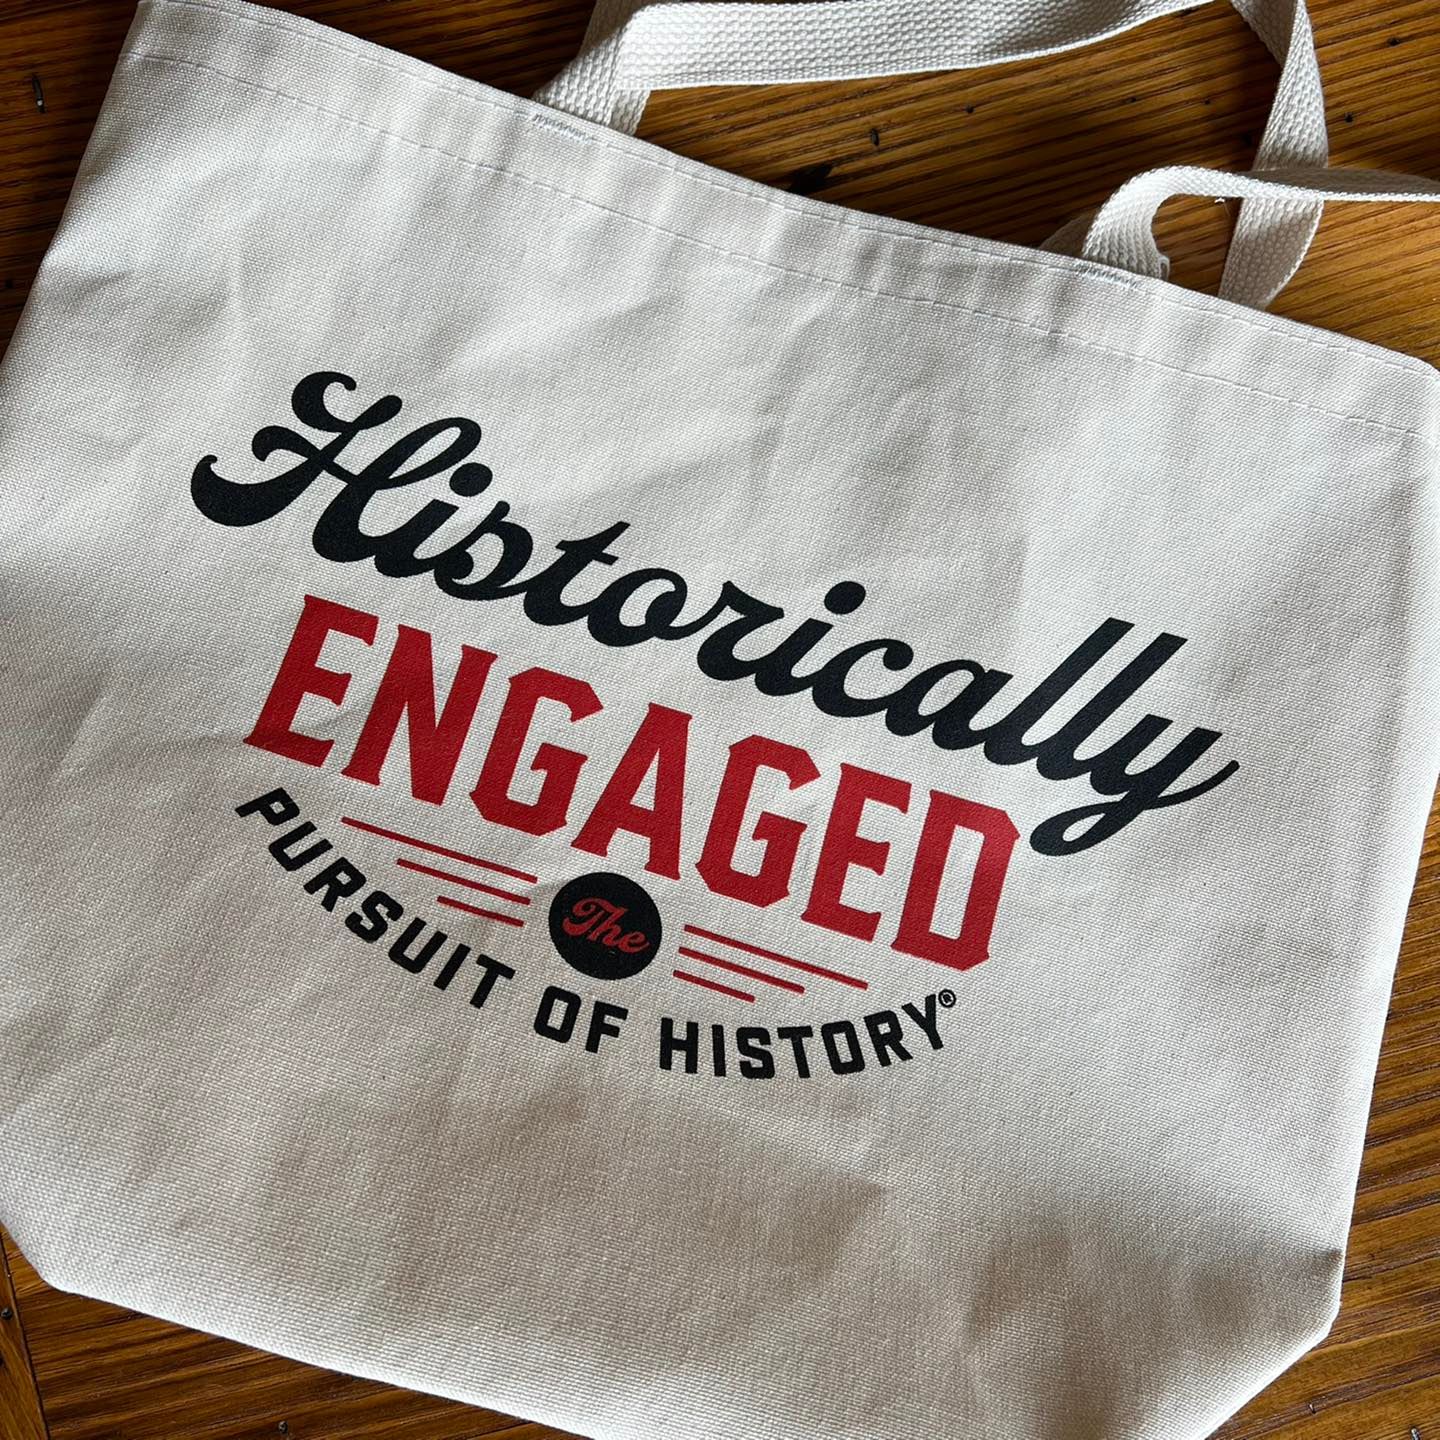 Historically Engaged Tote Bag 